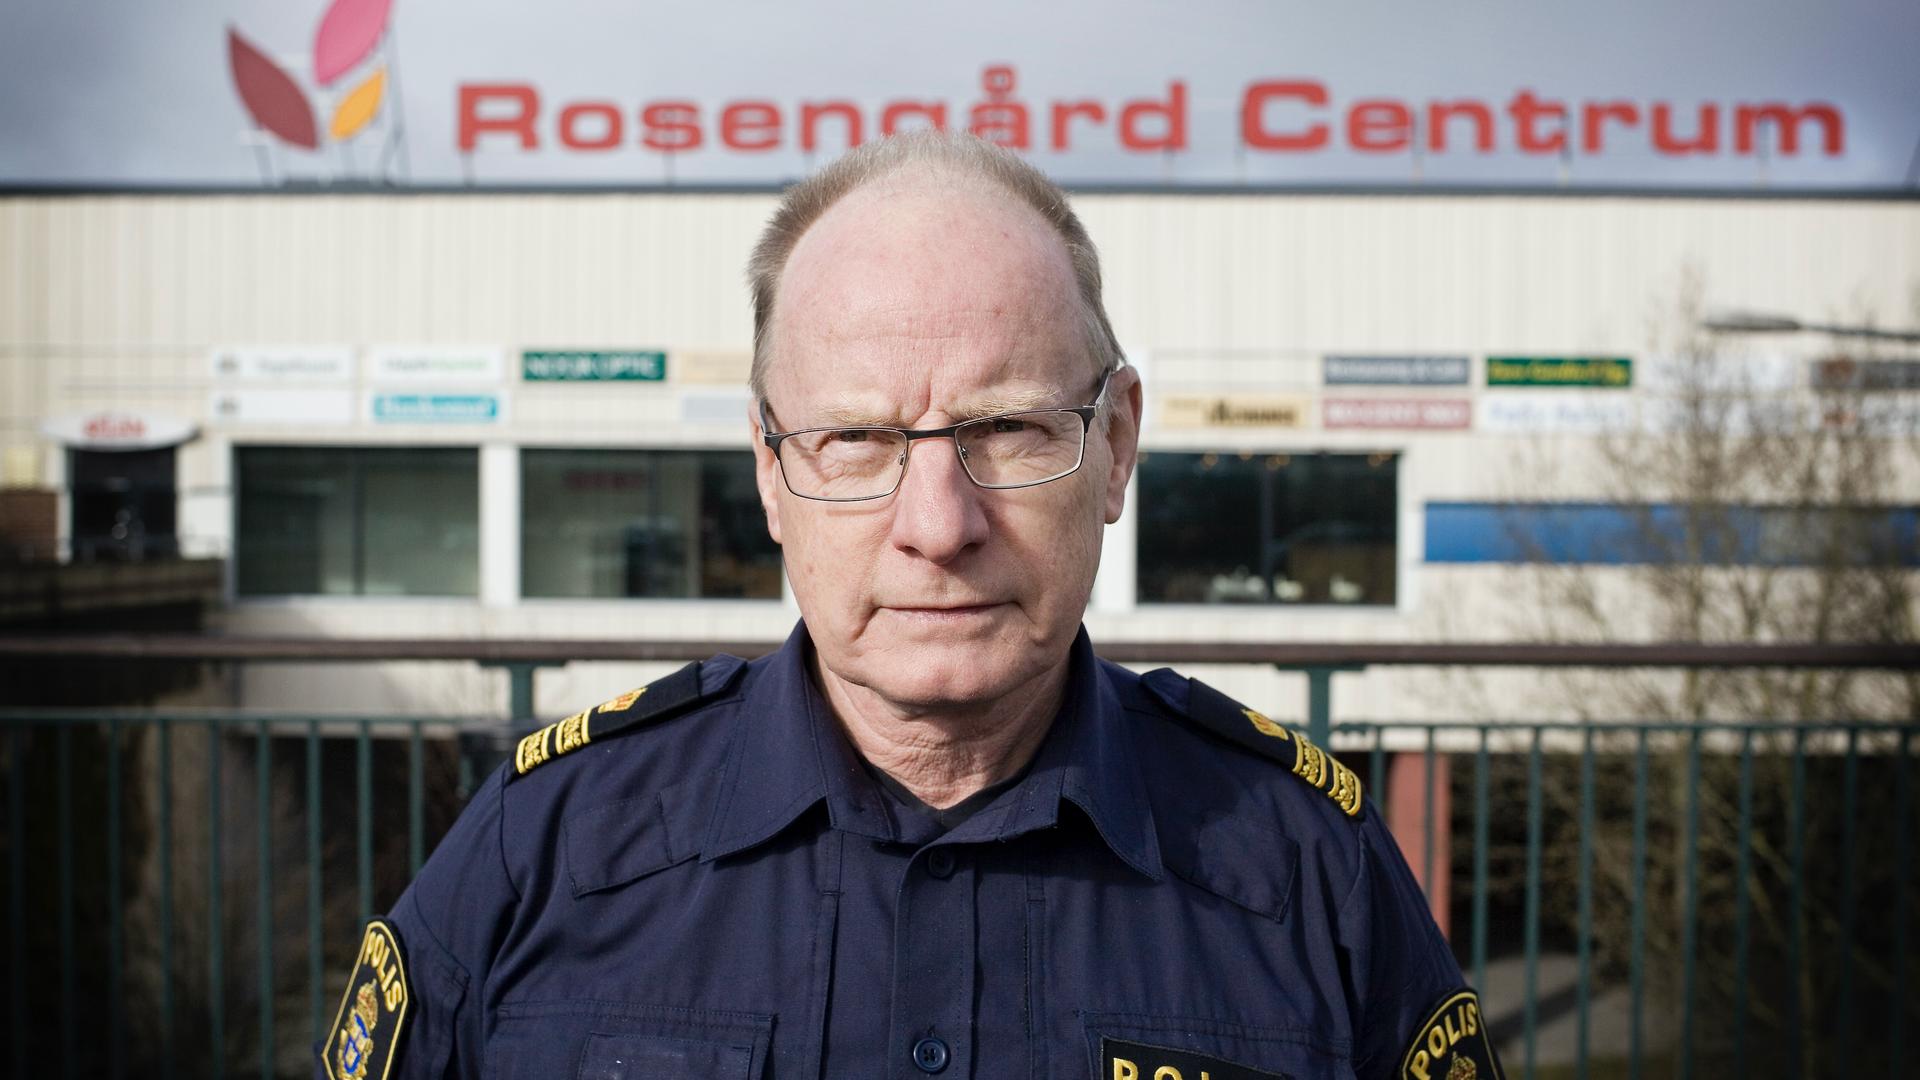 Glen Sjögren, a 40-year police officer in Malmö, Sweden, says he was surprised by a recent report showing the rate of gun violence in the country has gone up. His city has been successful in recent years in tackling gangs and gun violence.  